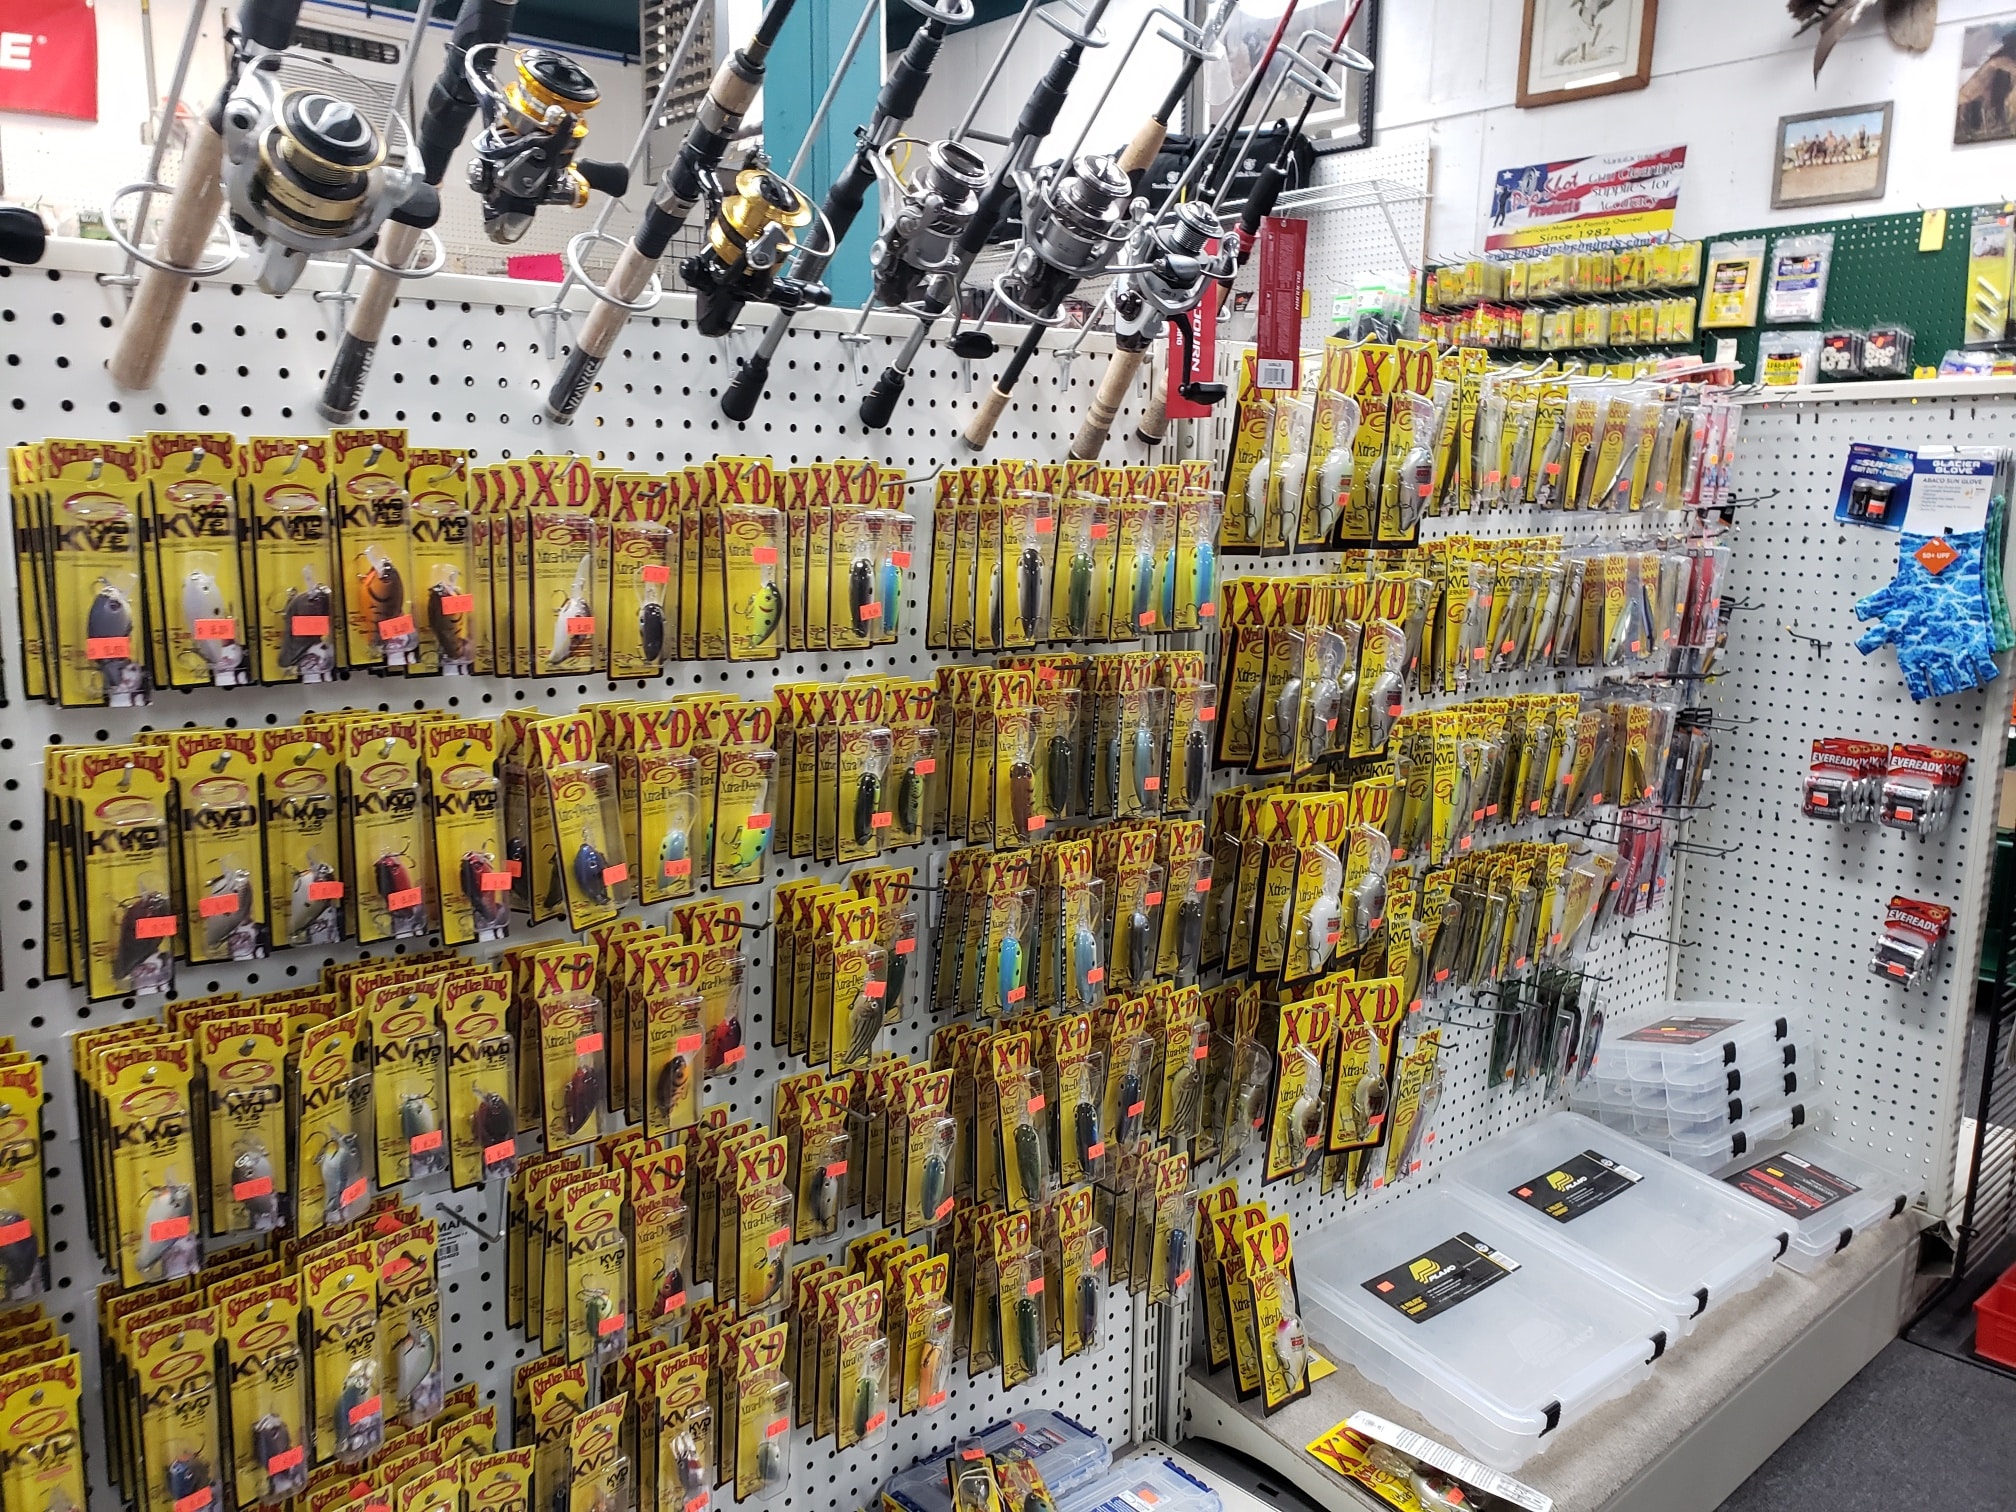 Fishing Supplies in New Hampshire